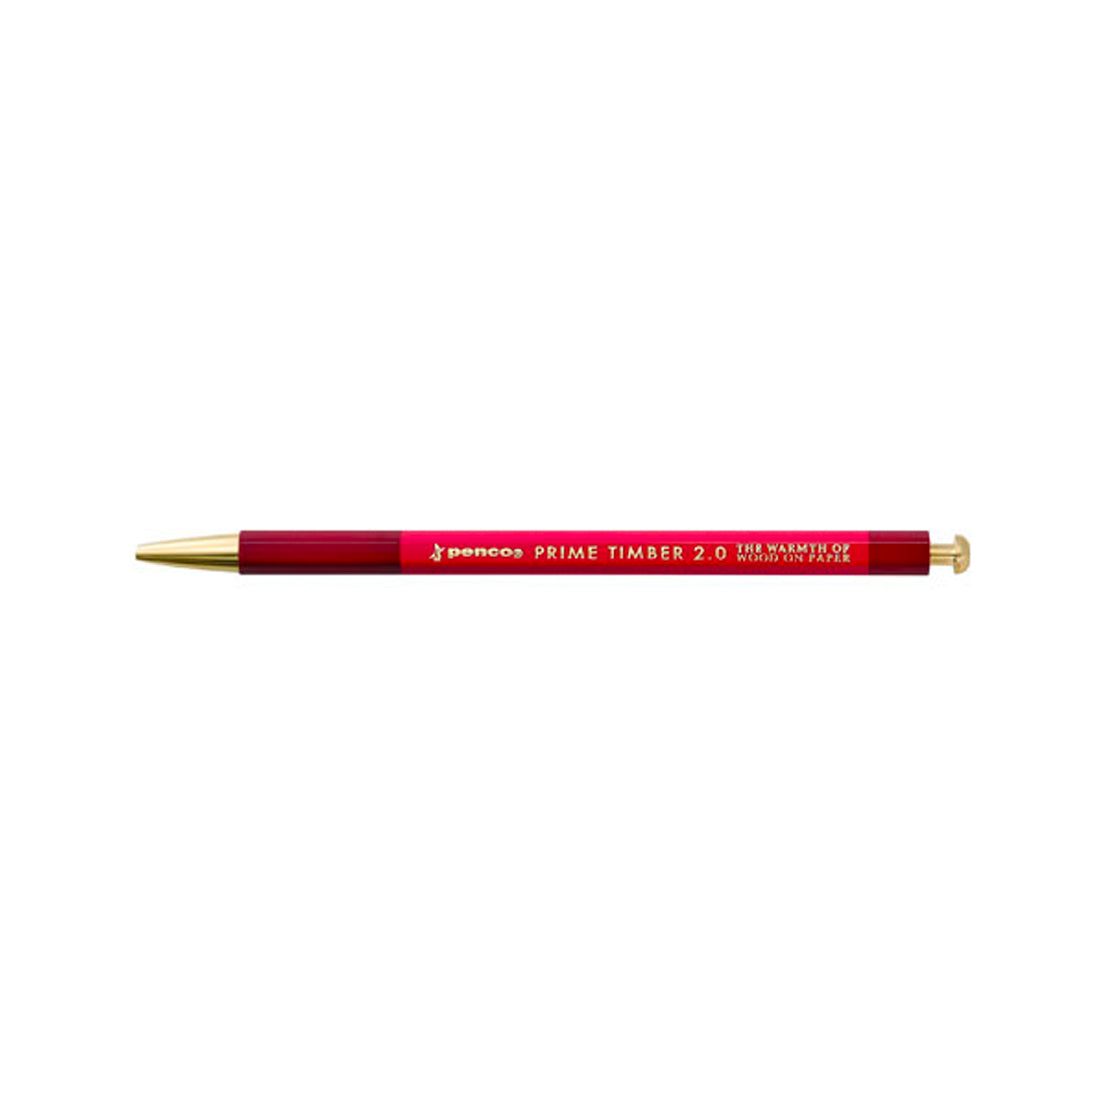 RED BRASS PRIME TIMBER 2.0 MECHANICAL PENCIL